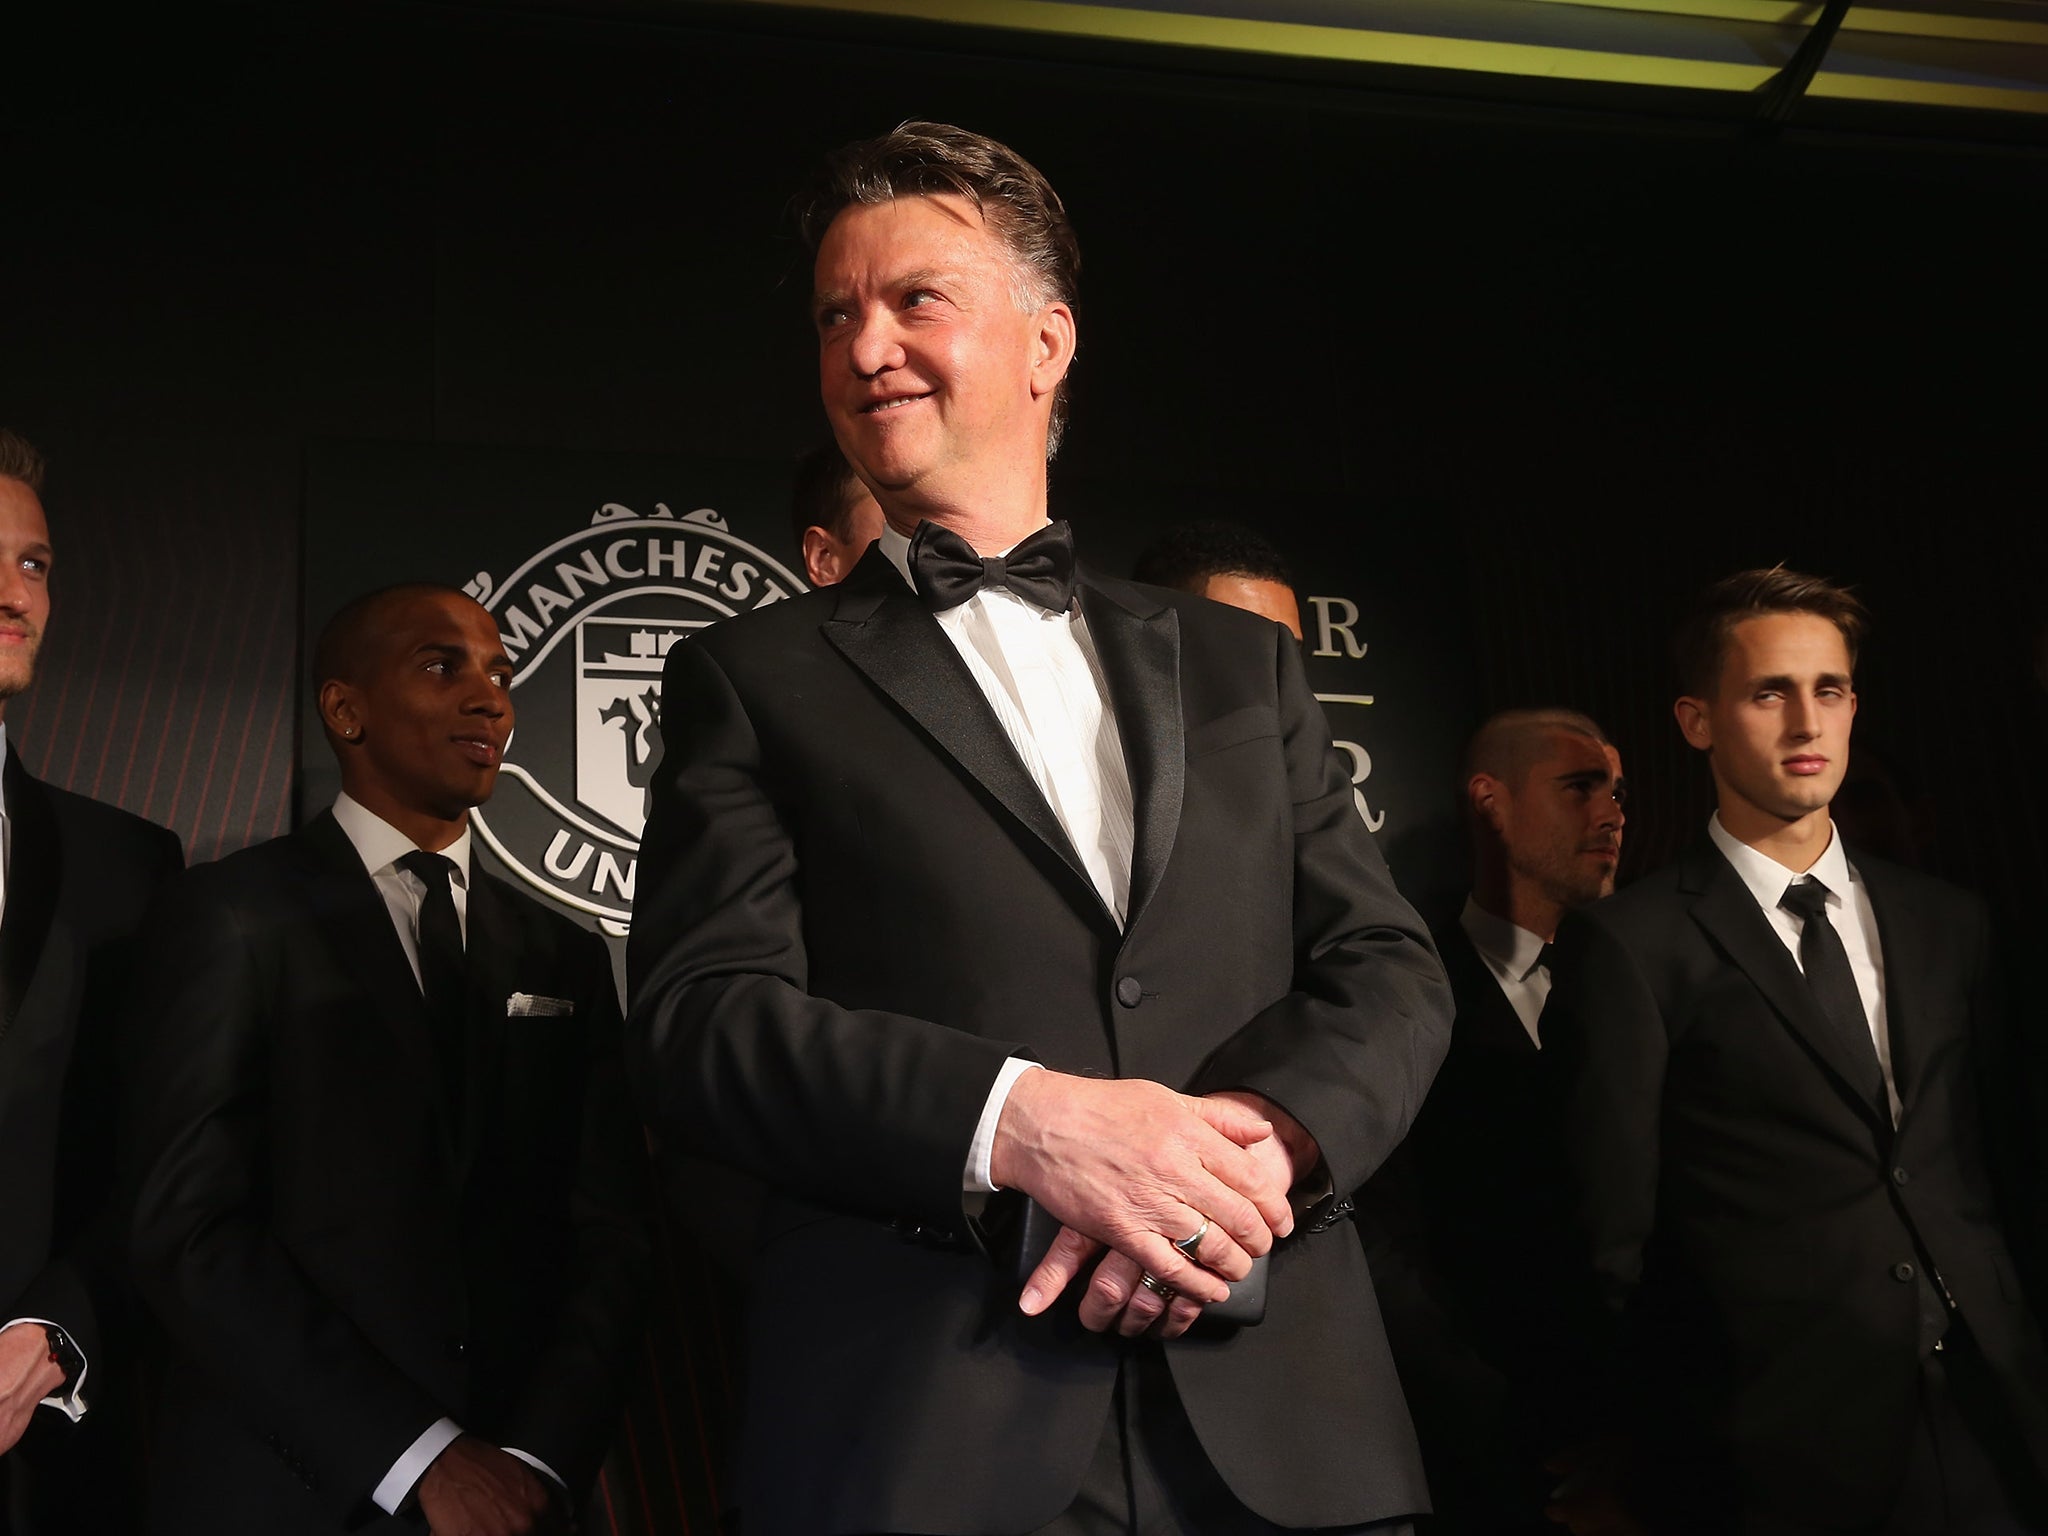 Louis van Gaal at the Manchester United awards dinner